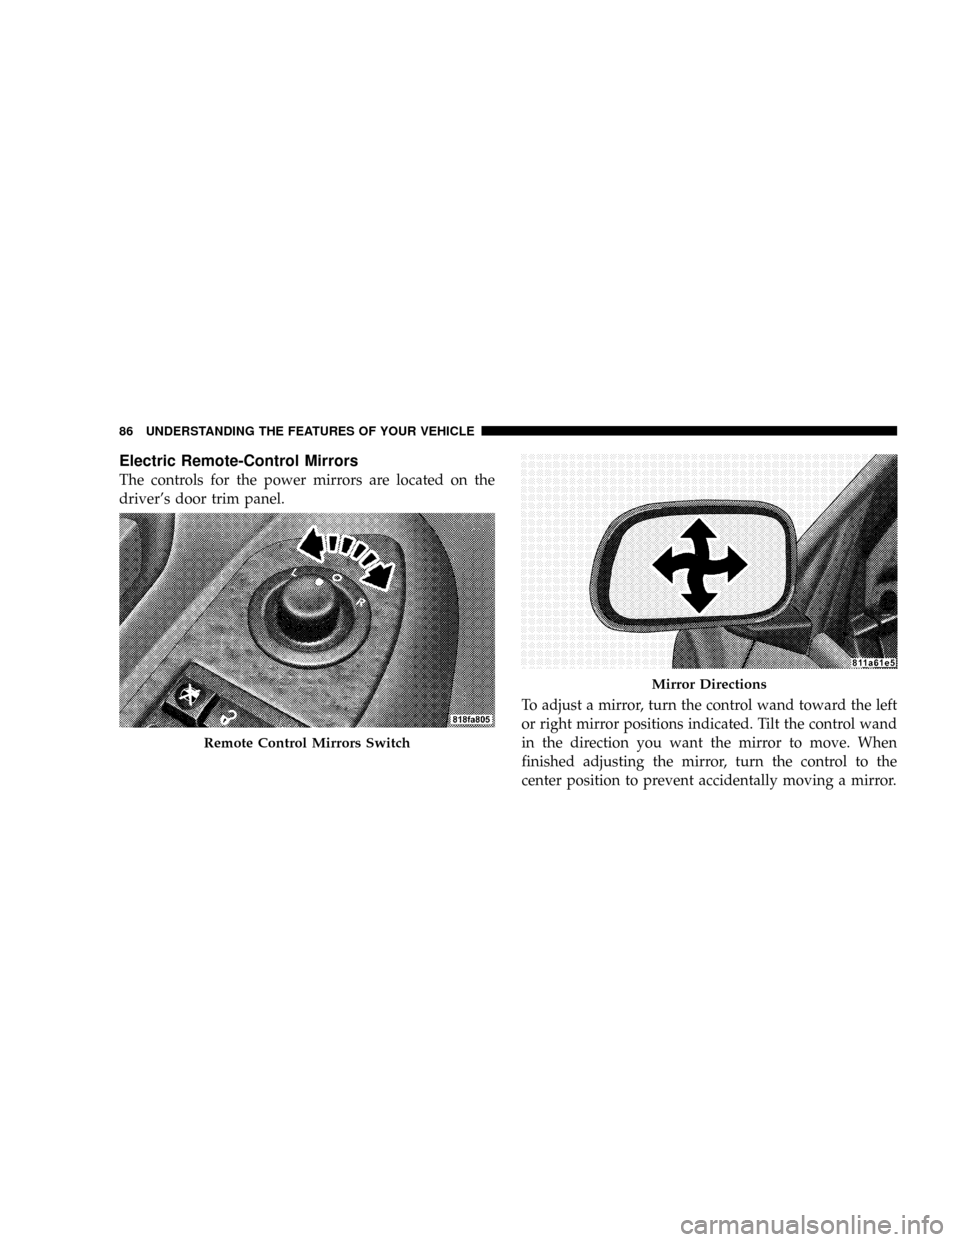 CHRYSLER ASPEN 2008 2.G Owners Manual Electric Remote-Control Mirrors
The controls for the power mirrors are located on the
drivers door trim panel.
To adjust a mirror, turn the control wand toward the left
or right mirror positions indi